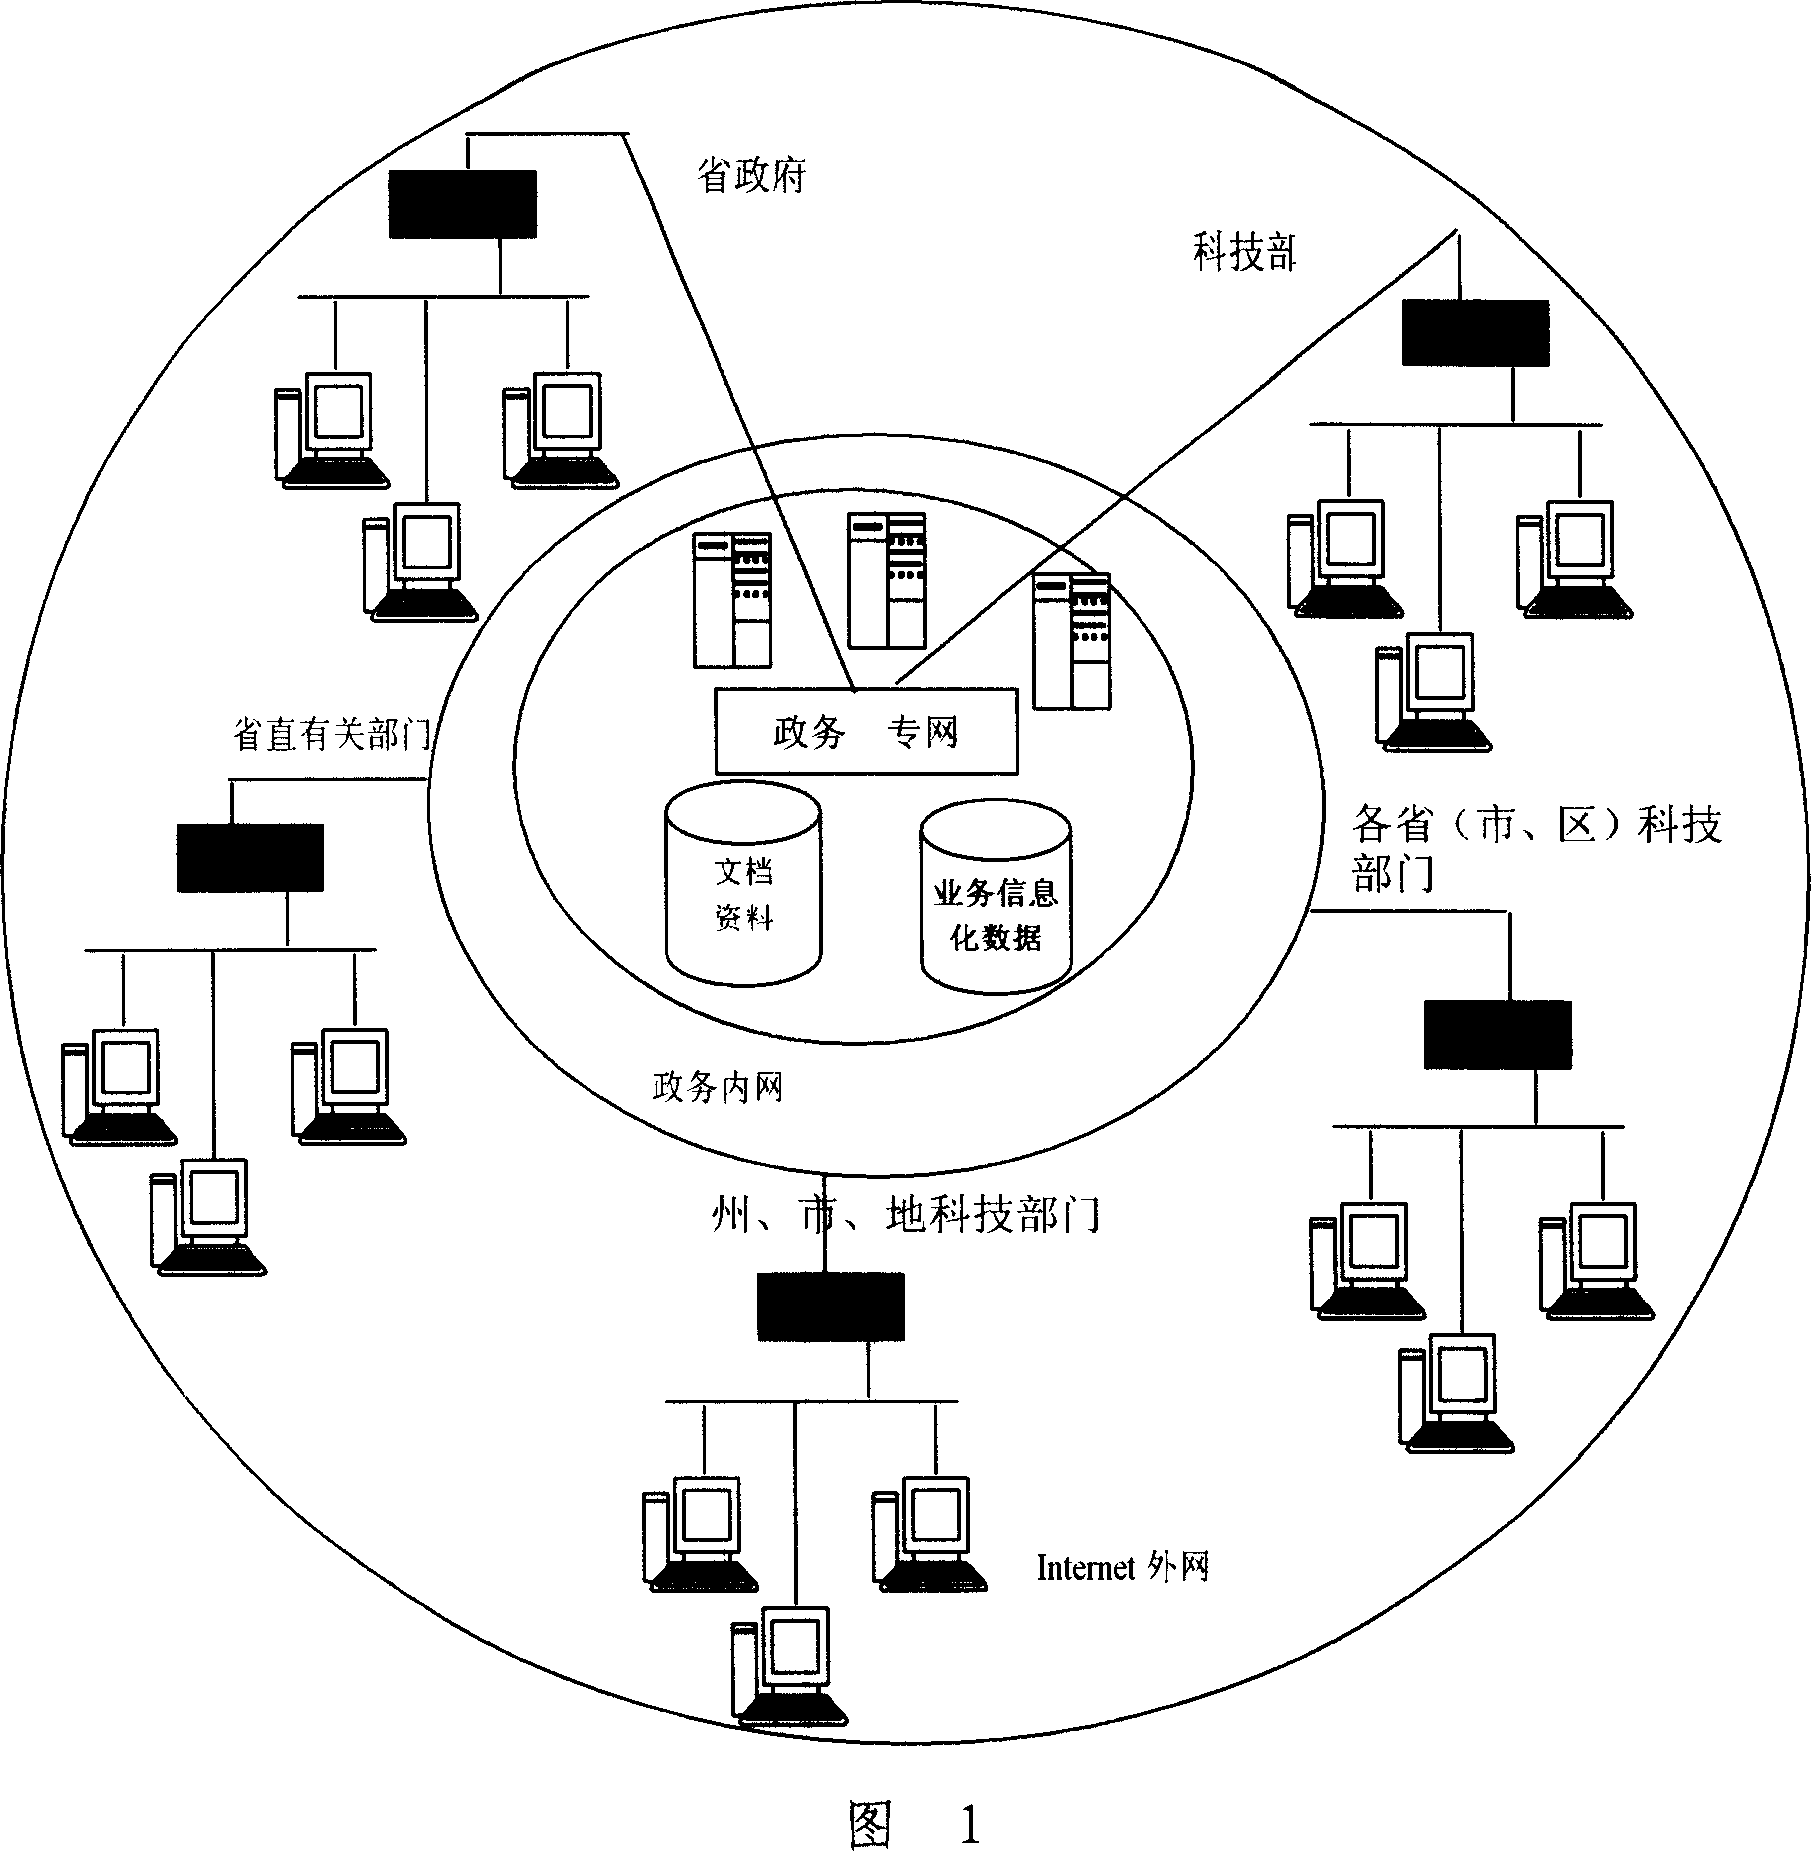 Electronic government operation and administration network of scientific and technical system